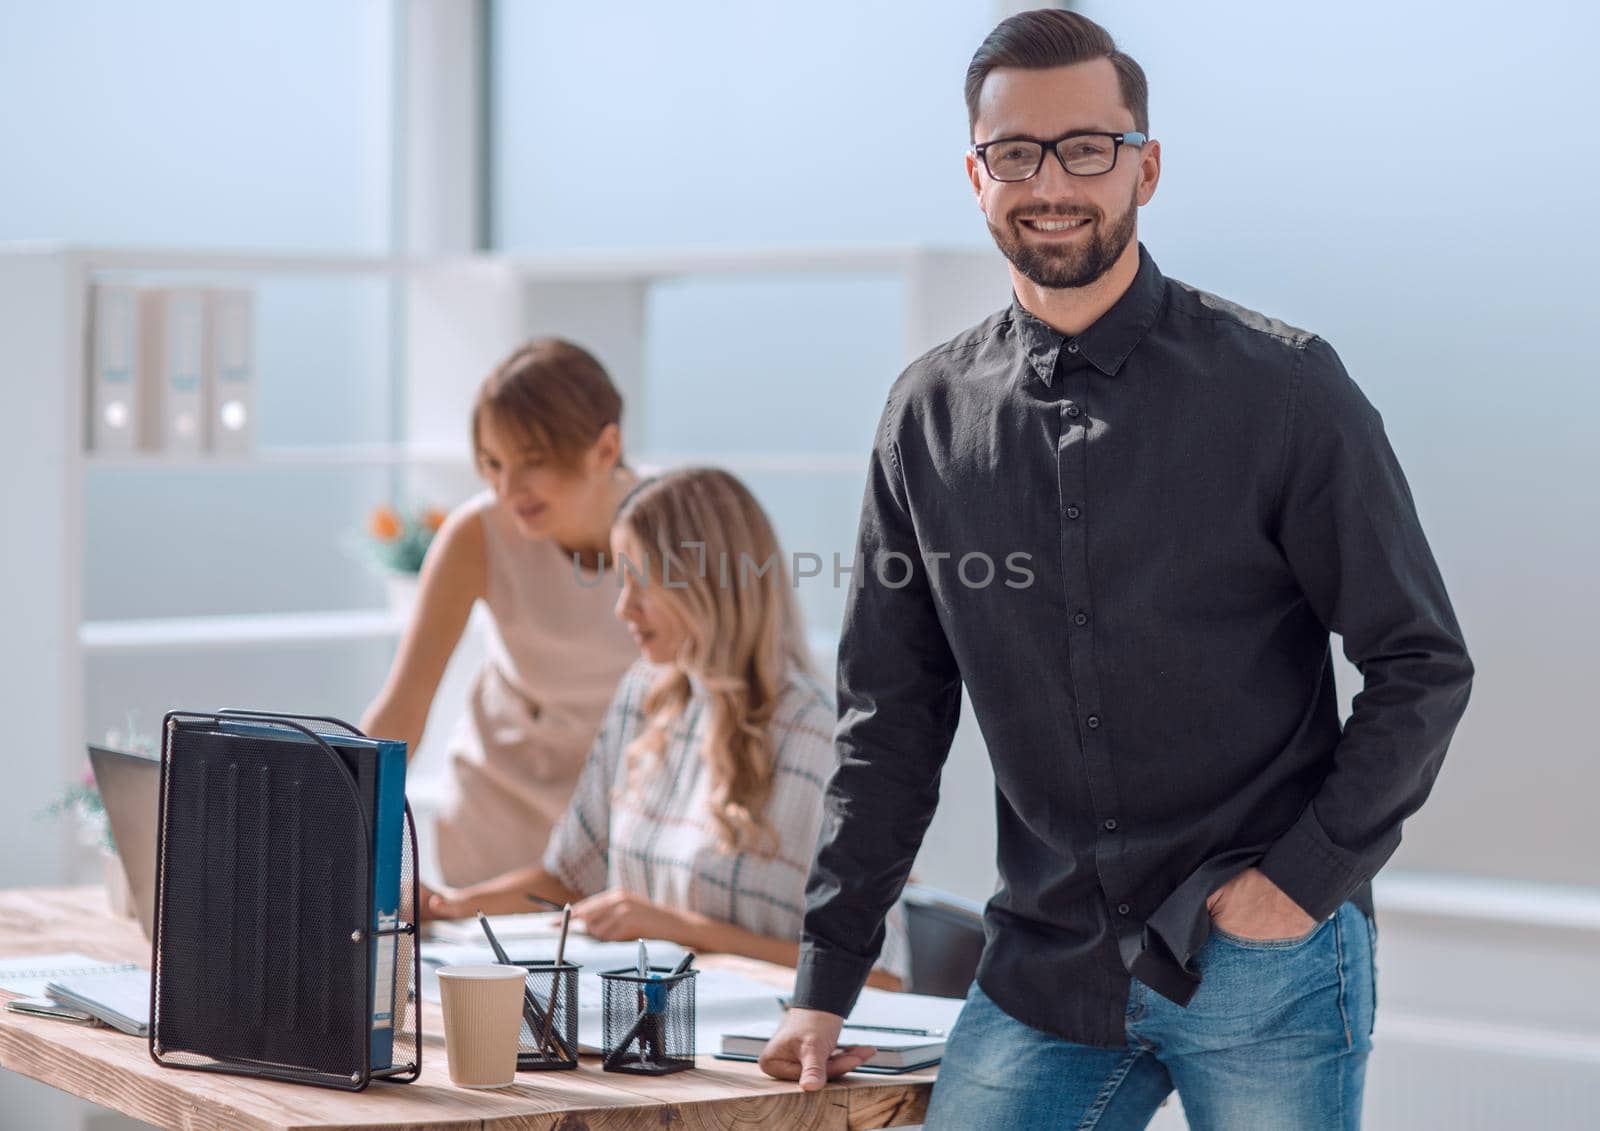 smiling young businessman standing in office. business concept